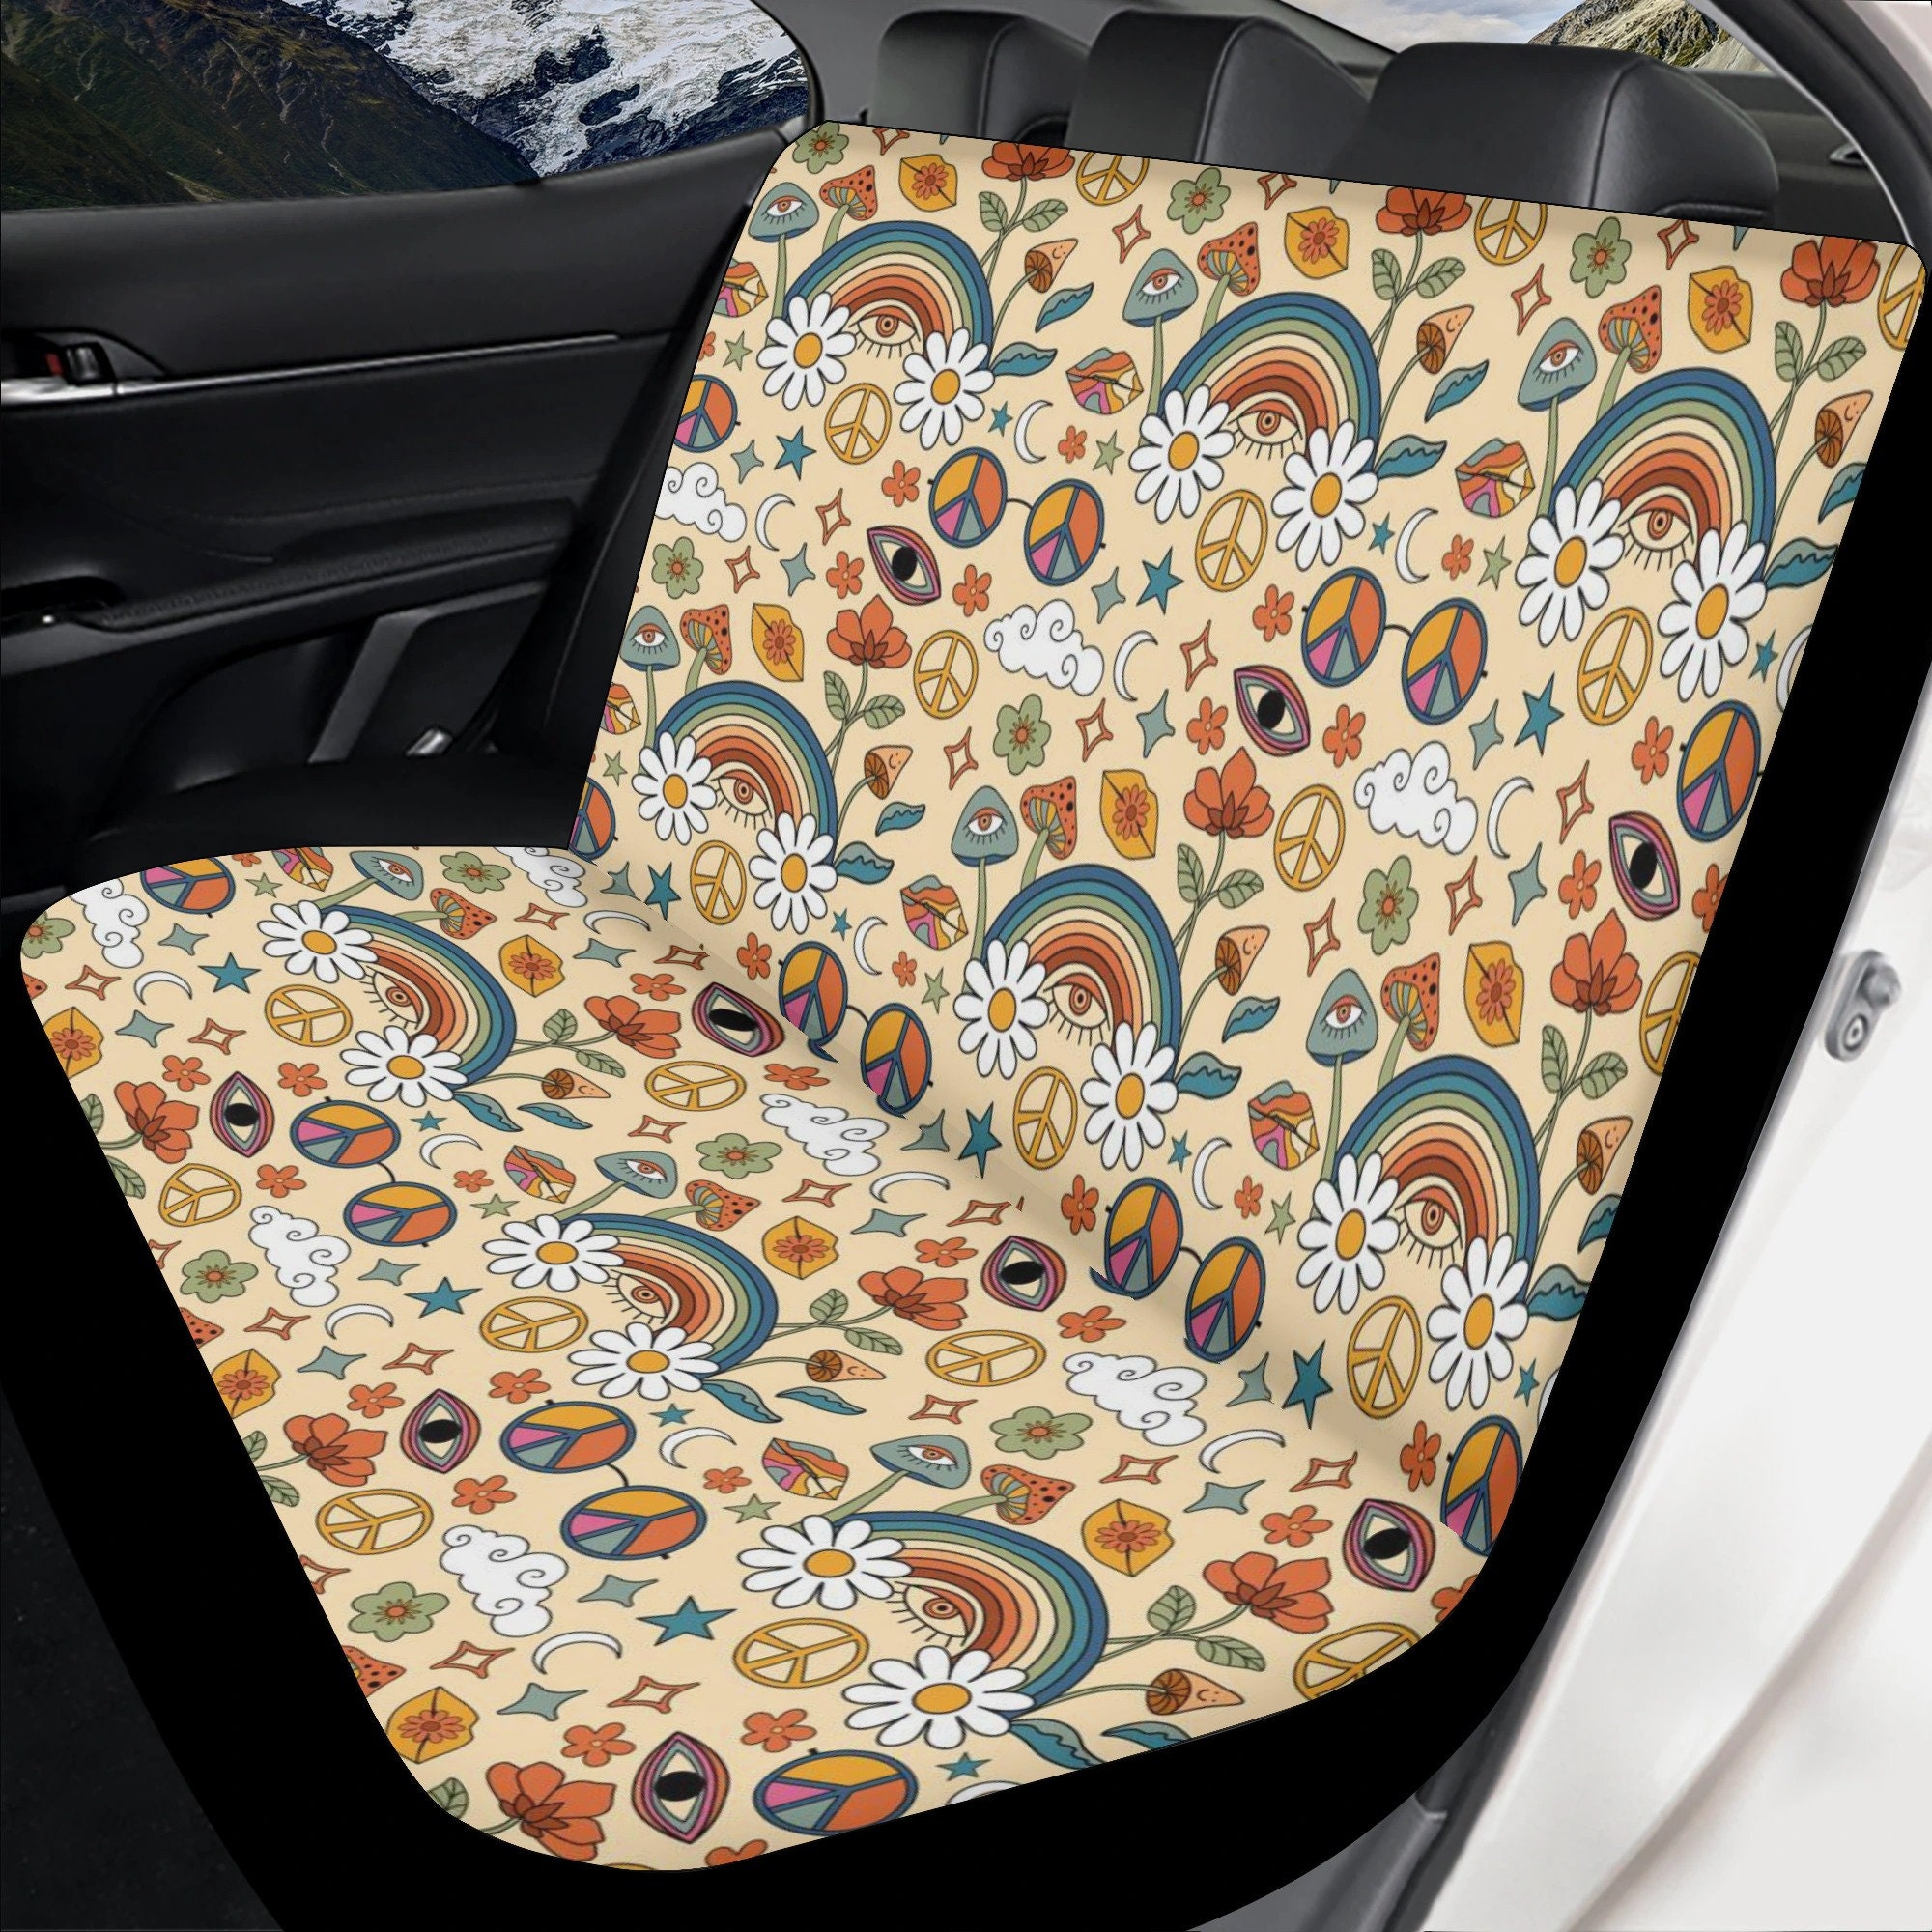 Discover Rainbow Peace Hippie Car Seat Covers, Cute Car Seat Cover Set, Retro Seat Cover for Vehicle, Aesthetic Car Accessories